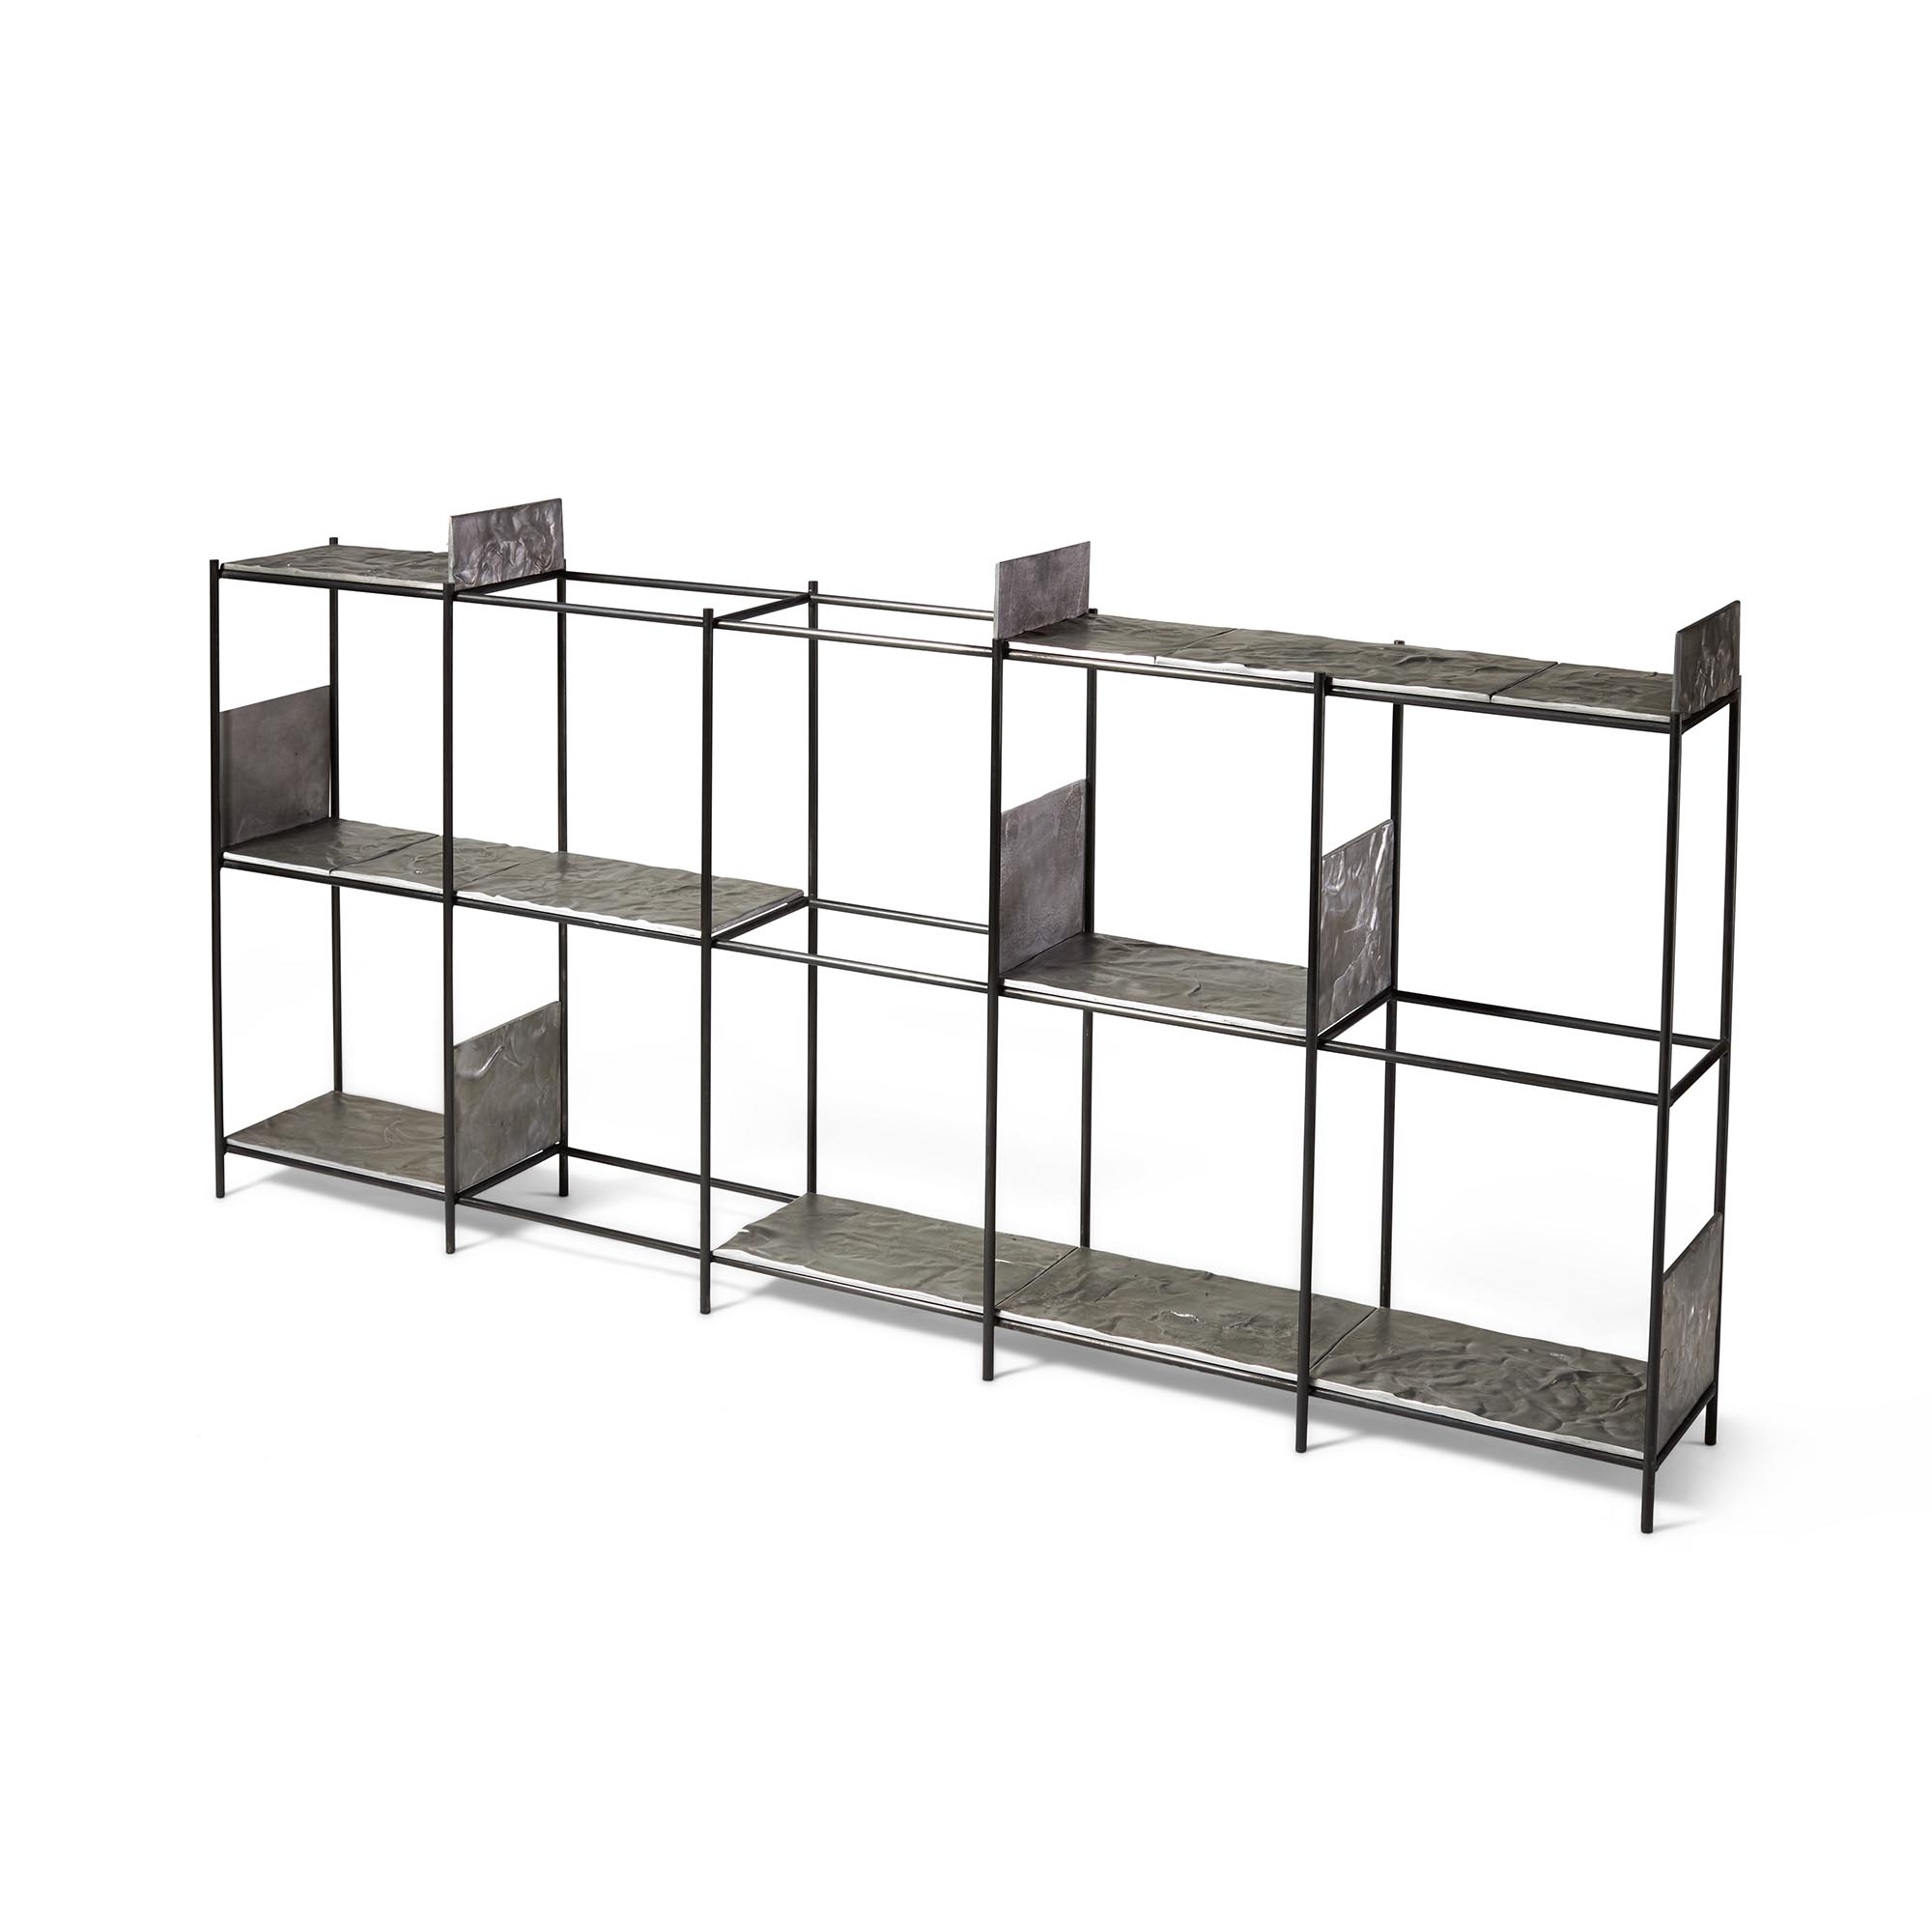 Tuell and Reynolds - Caldera Etagere